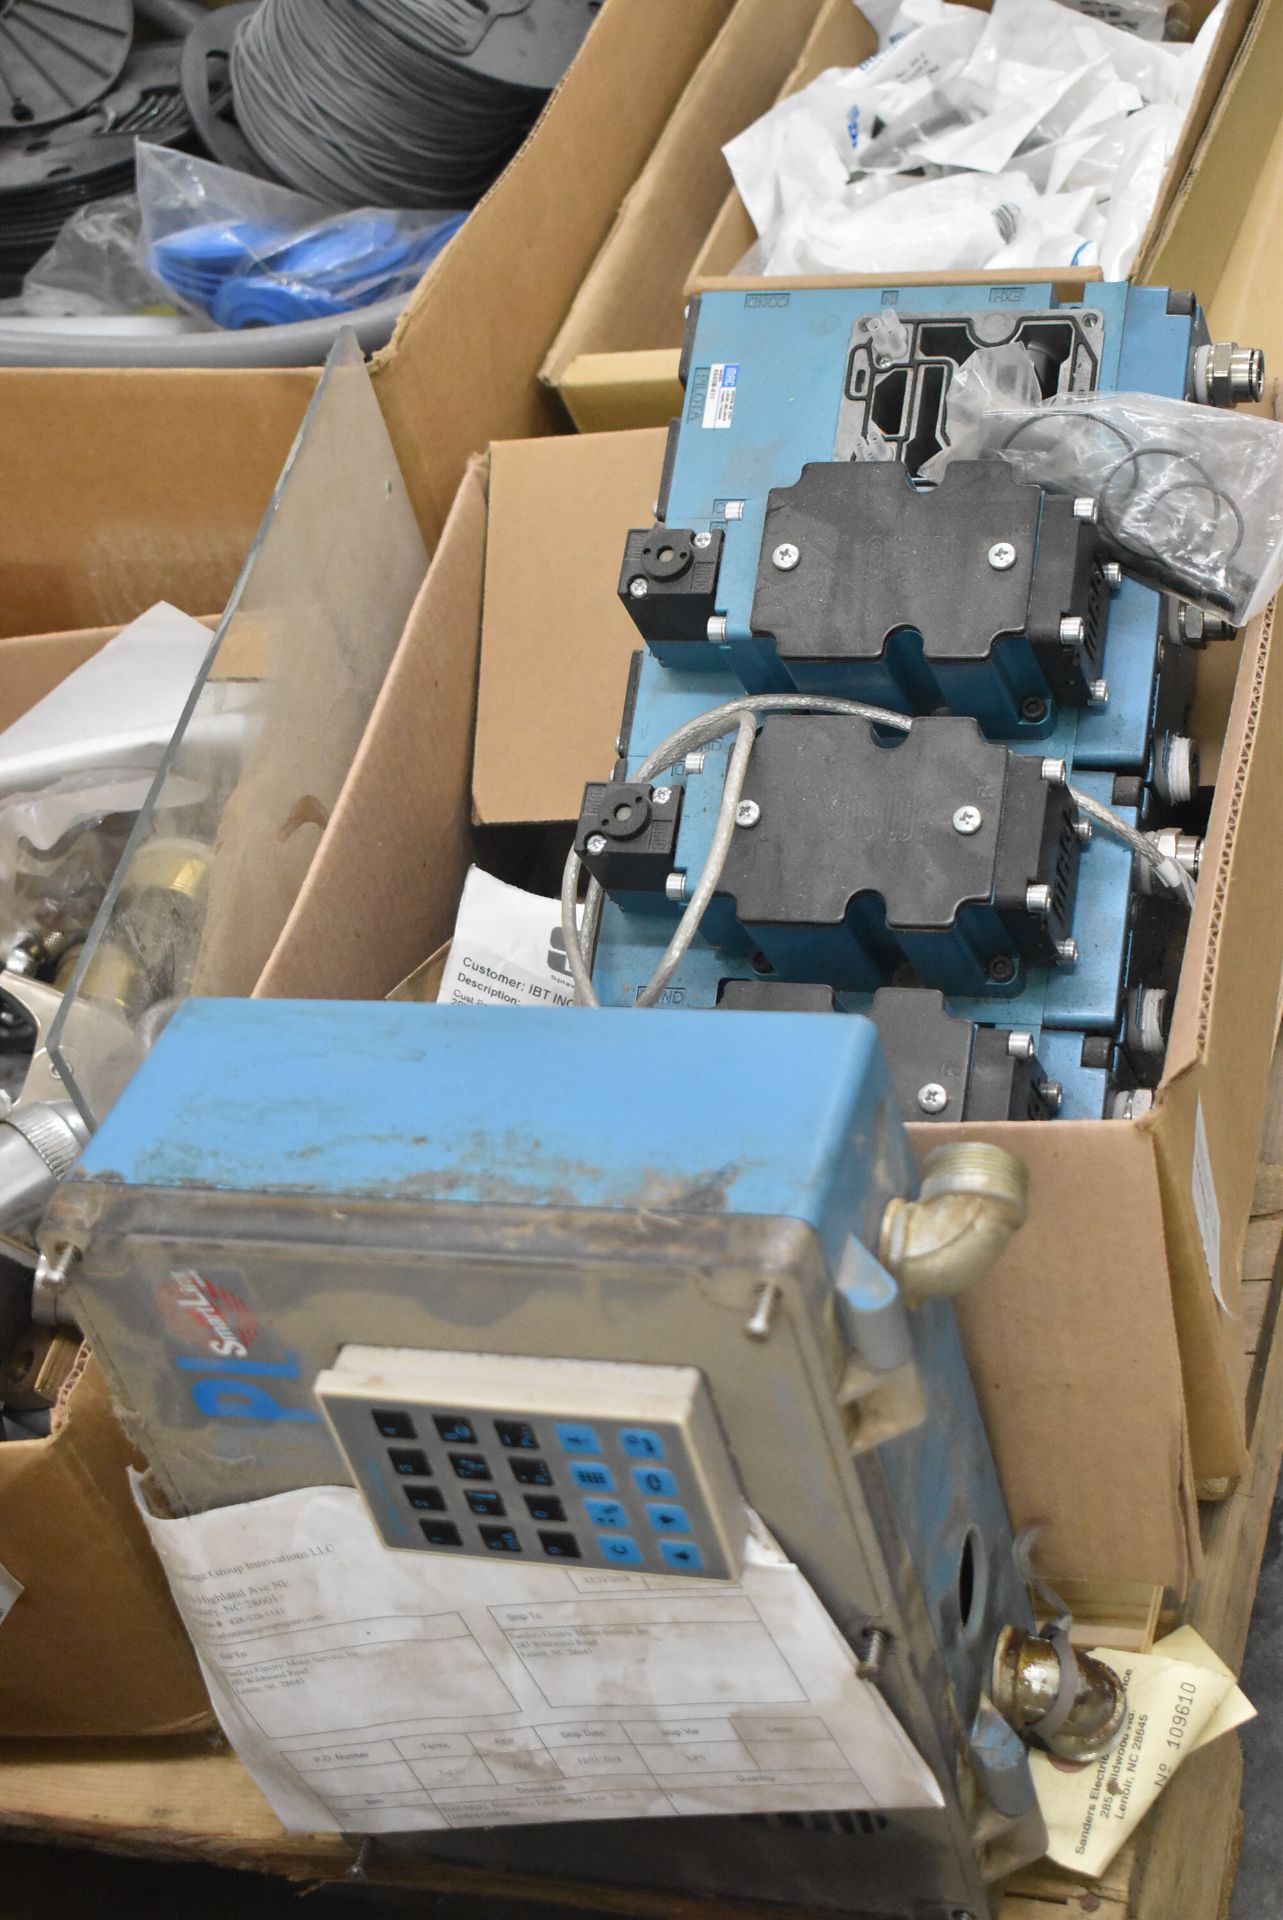 LOT/ SKID WITH CONTENTS - INCLUDING AUTOMATION COMPONENTS, SPARE PARTS, SHOP SUPPLIES, ELECTRICAL - Image 2 of 7